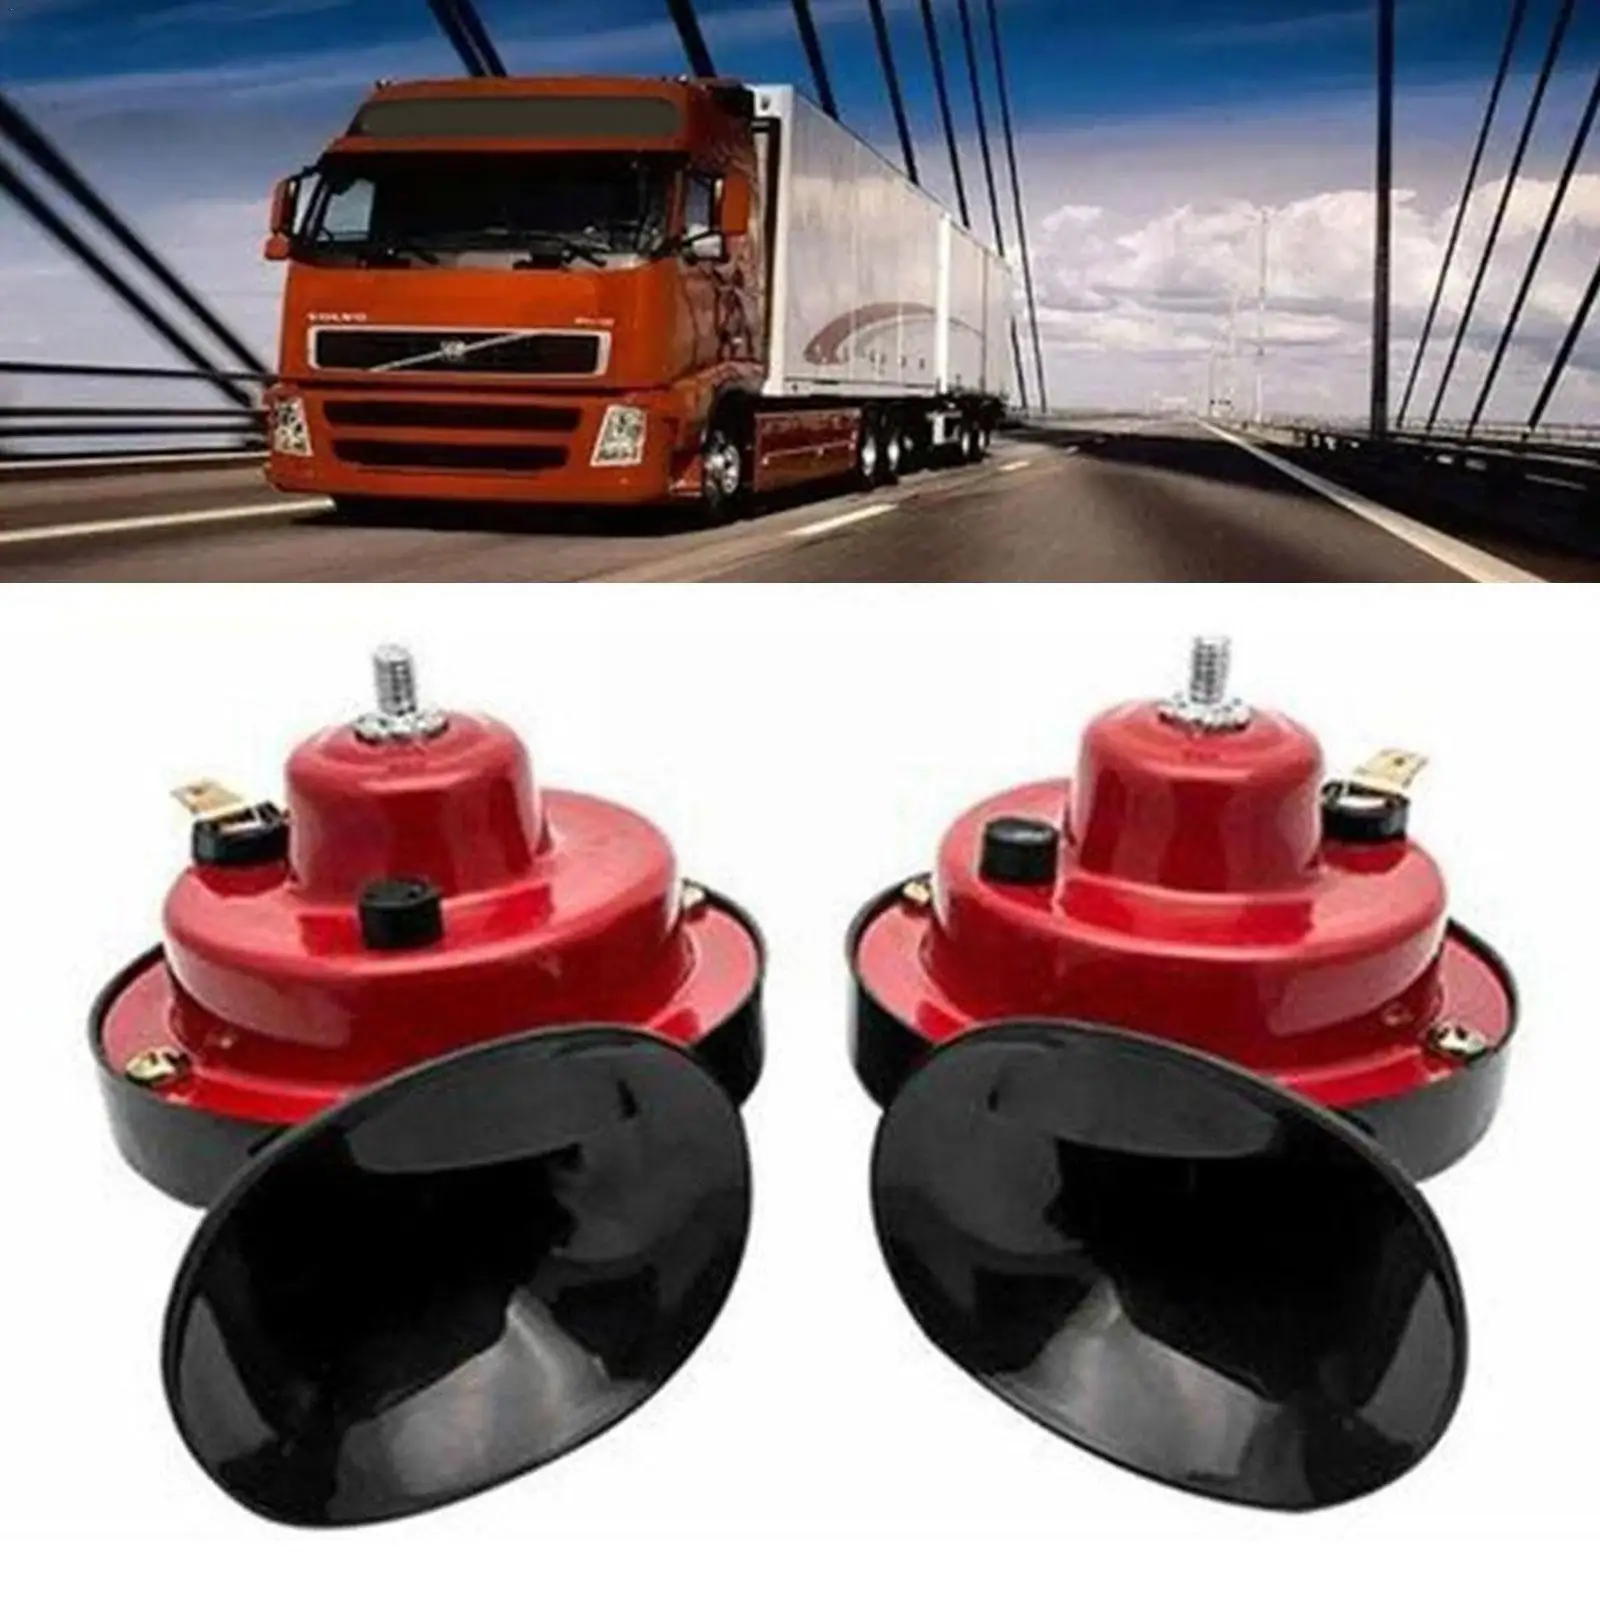 

1pc 24V Electric Snail Horn Universal Loud Car Horn Train Loud Horns Large Snail Electric Siren Vehicle Horn Waterproof Sup I6W4